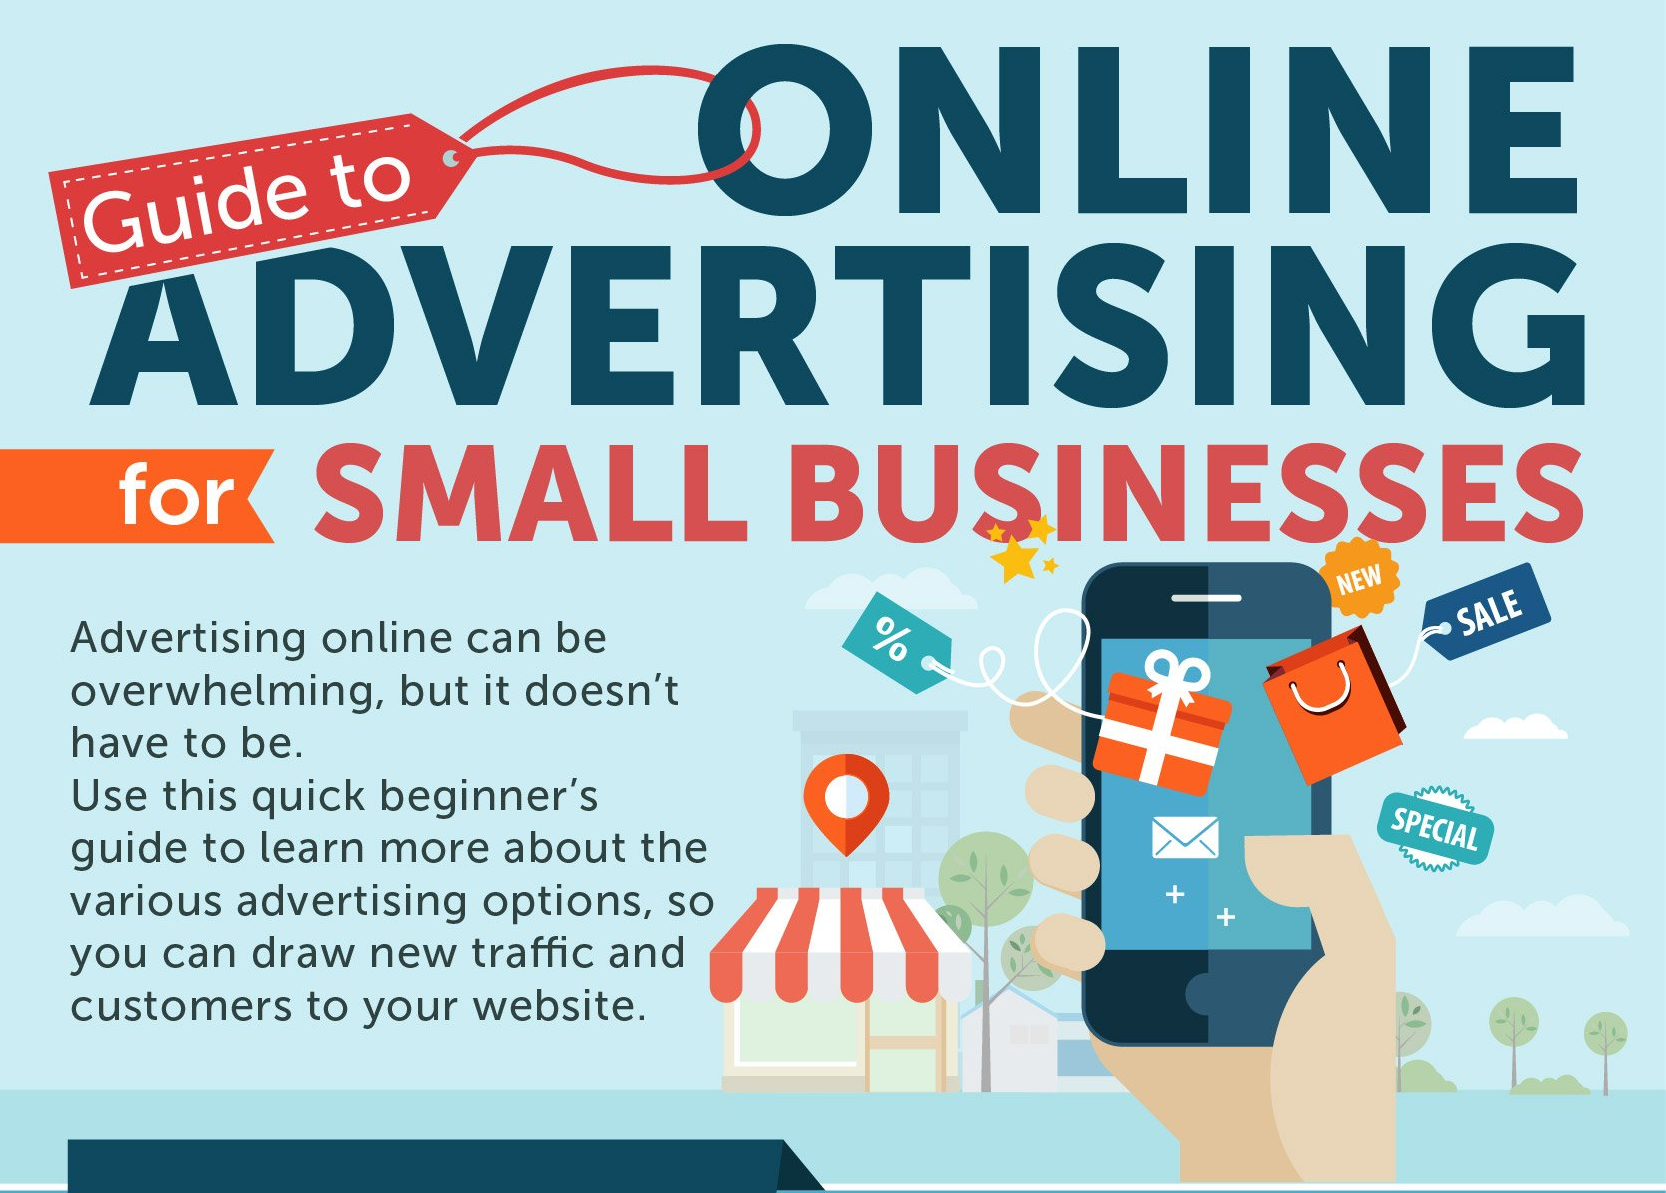 Guide to Online Advertising for Small Businesses